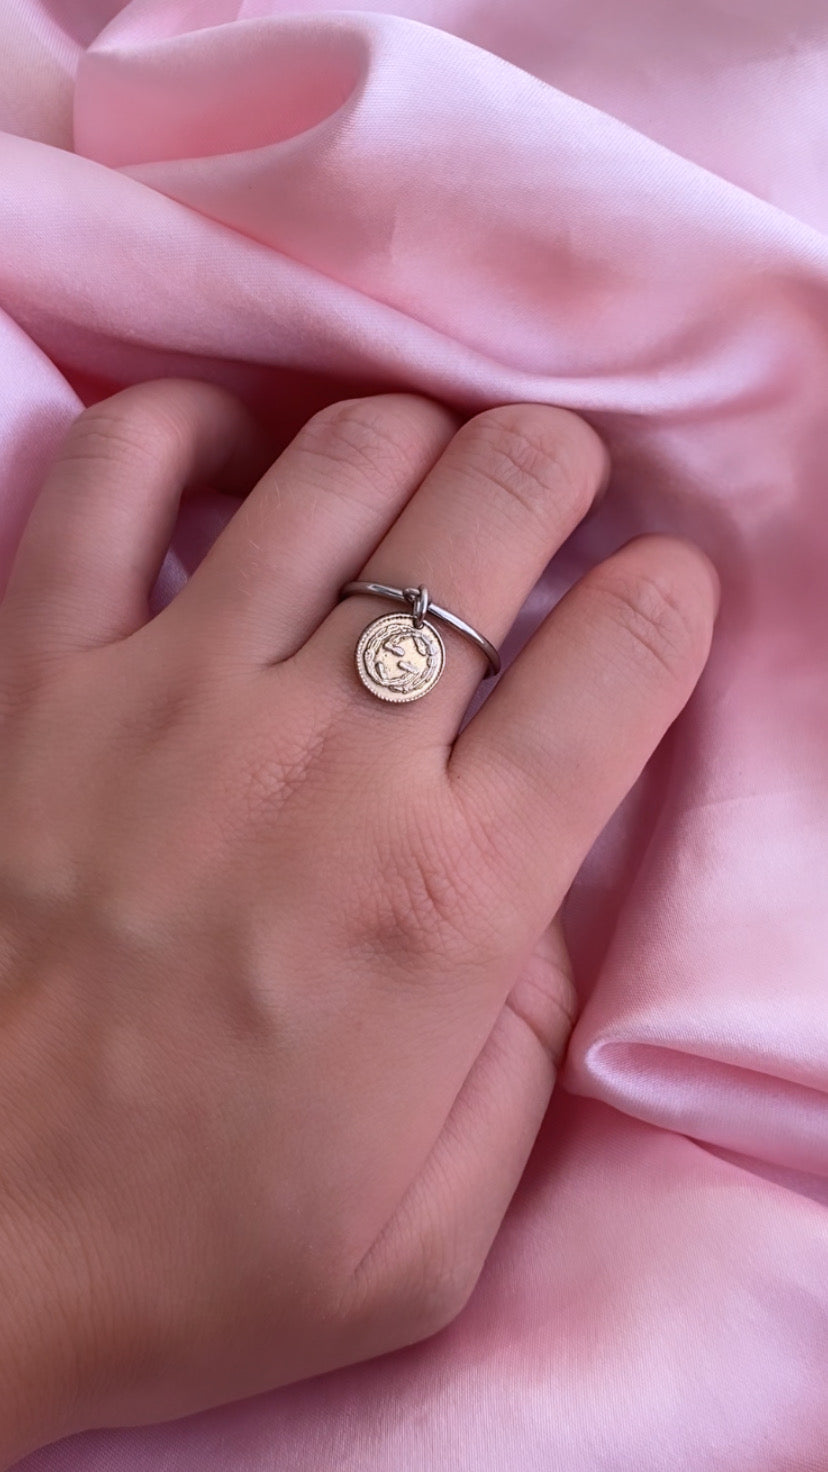 Christian Dior Ring - Baby